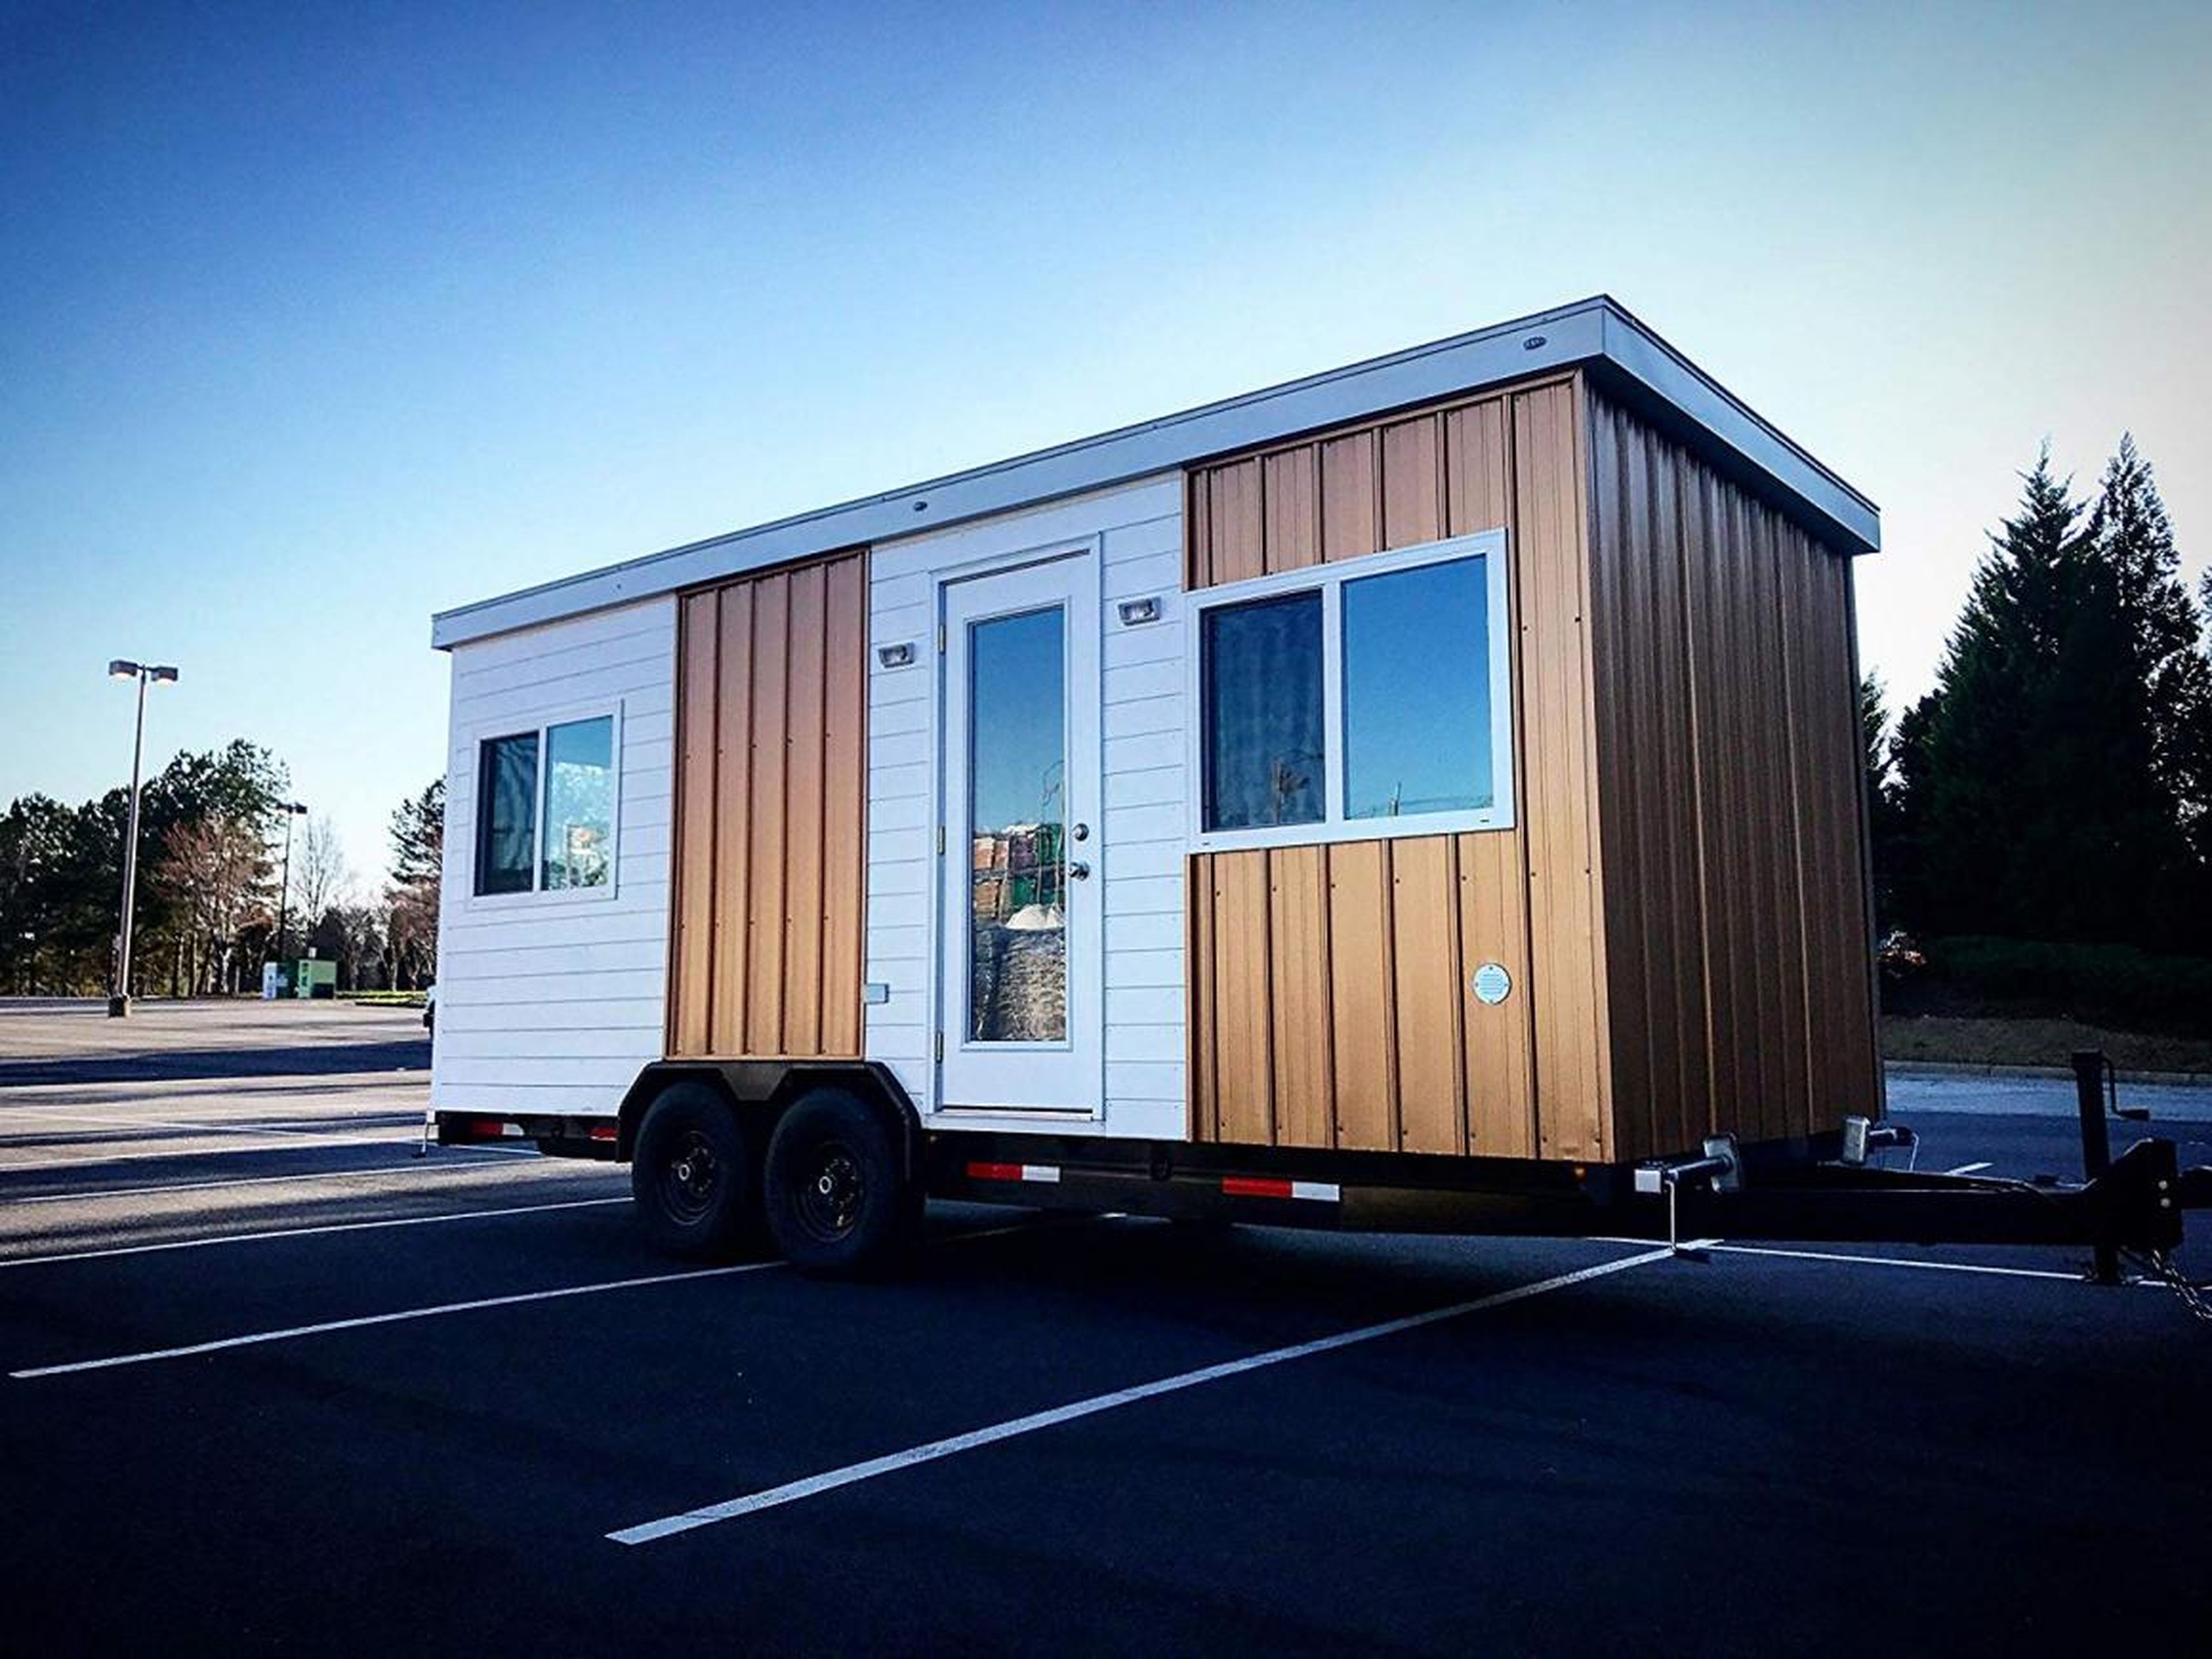 But if you're not looking to undertake a major construction project when you get a tiny home, Amazon also sells other types of tiny homes that come as-is, including numerous trailers on wheels that are made for easy traveling.